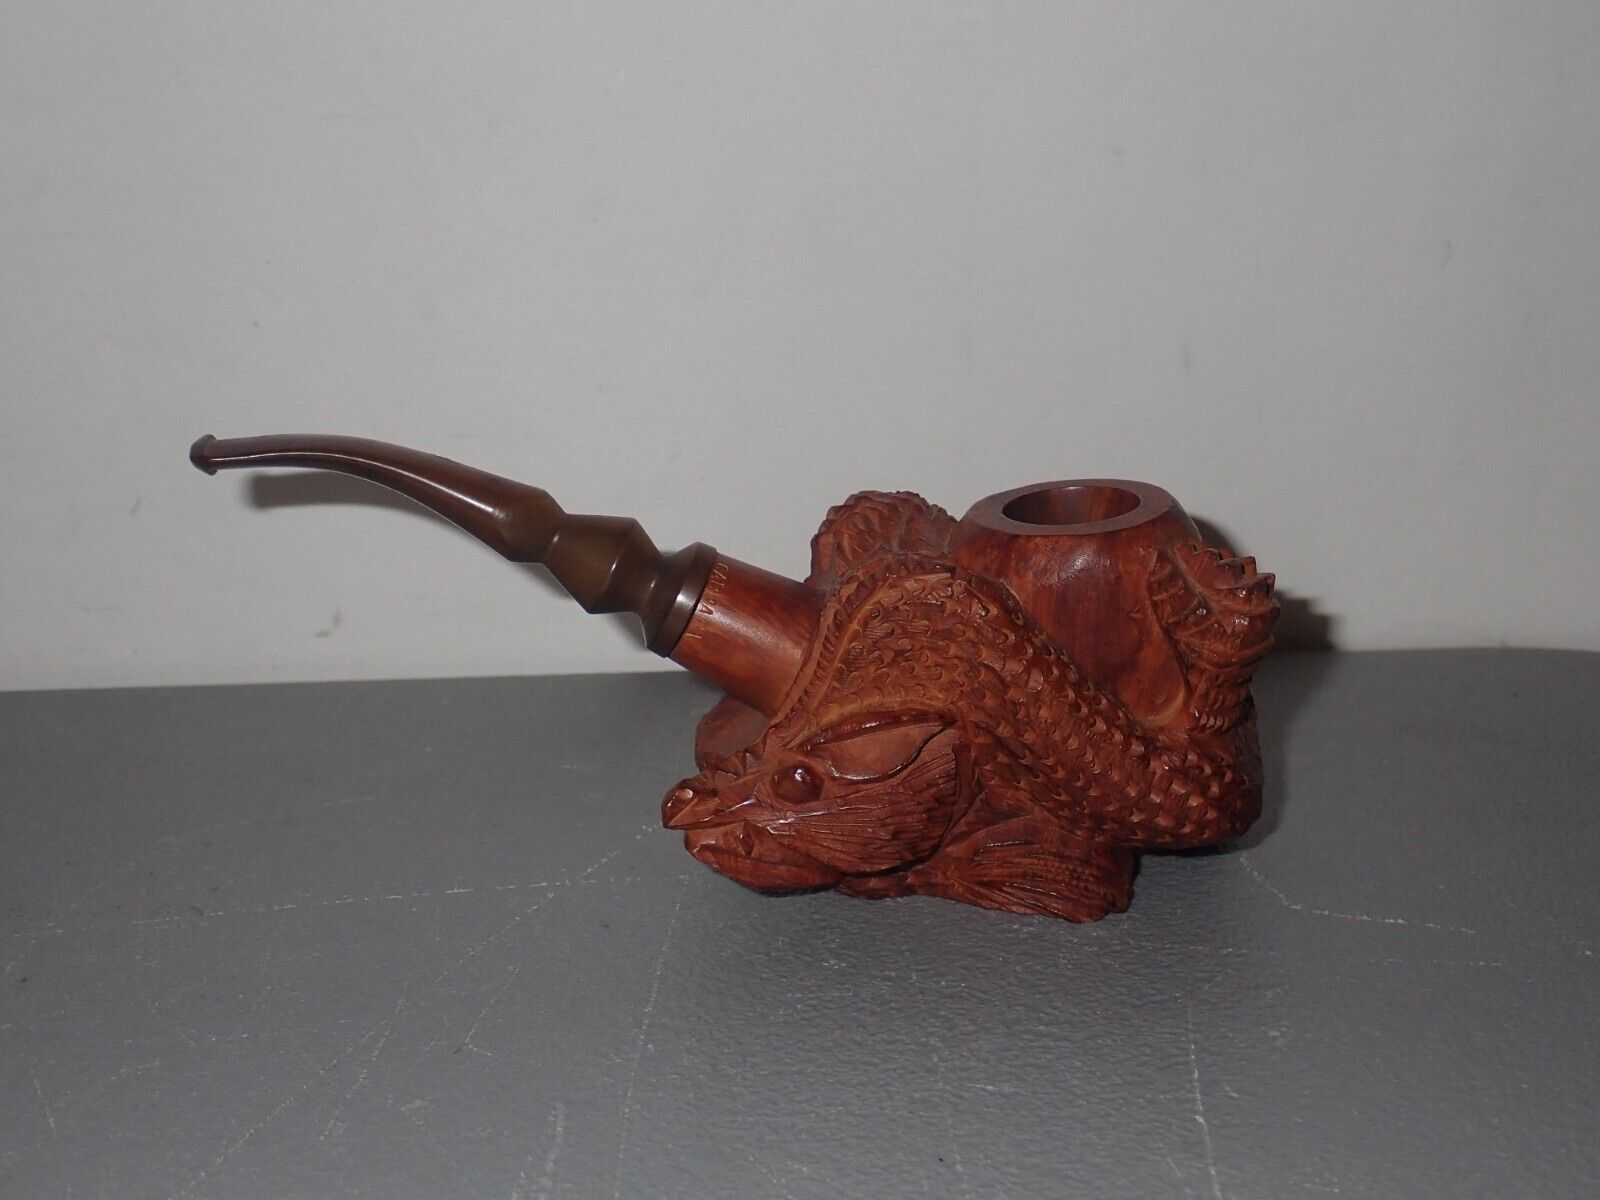 Vintage Lorenzo Italy Carrara Handcarved Dragon Tobacco Pipe, One Of A Kind